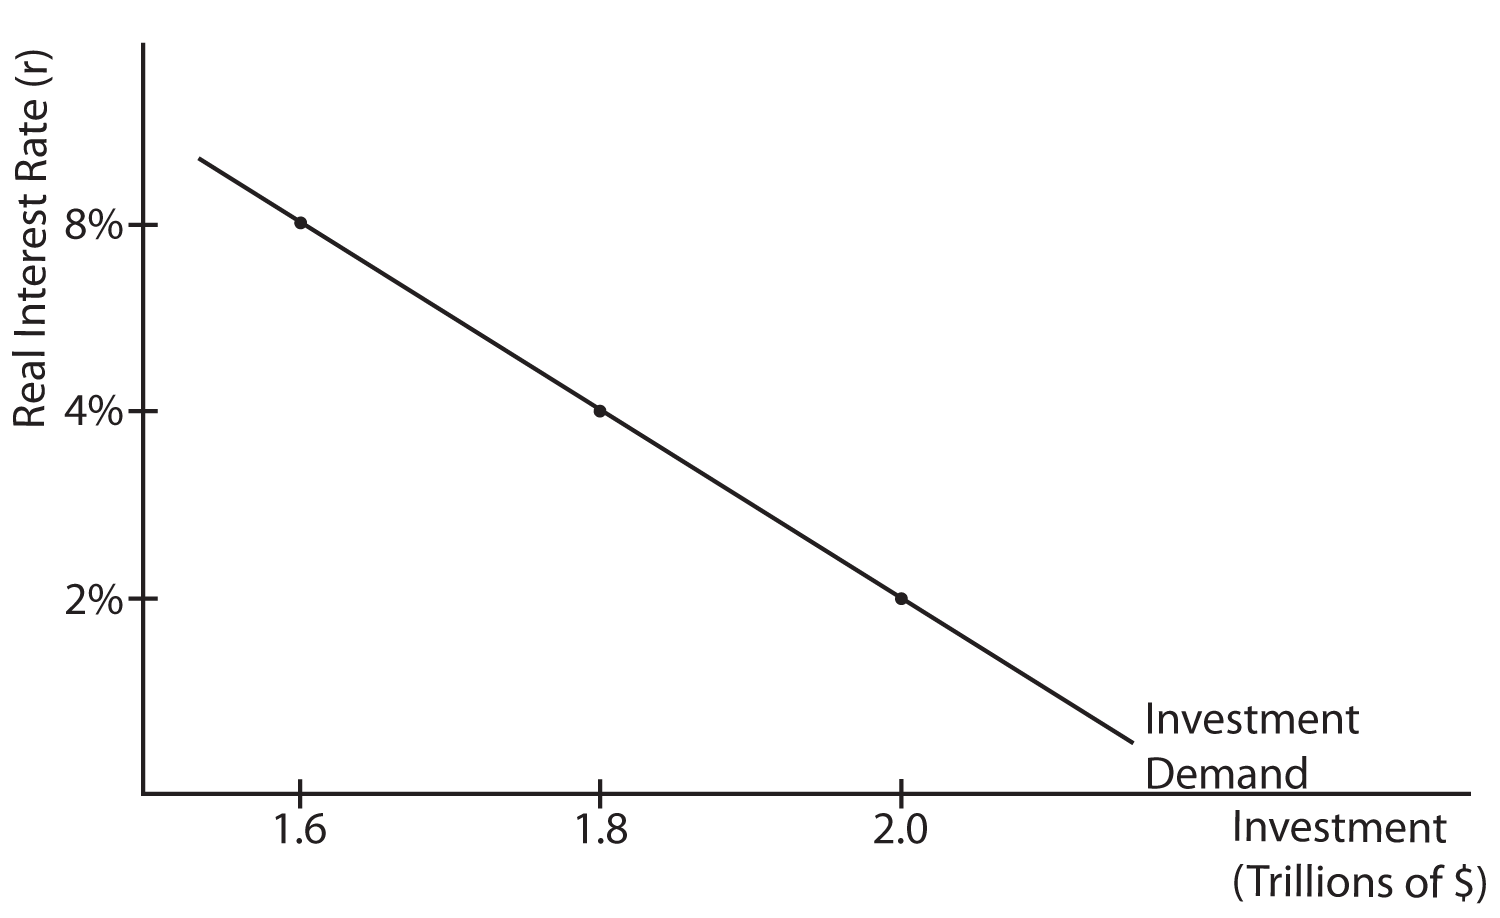 Image 6.07. This graph is placed depicts the X axis as Investment (Trillions of Dollars). The second graph's Y axis is labeled as Real Interest Rate (r). There are three labeled values on the X axis and three labeled values on the Y axis. On the X axis, the closest value to the origin is labeled 1.6. The value to the right of the first is labeled 1.8. The third value, which is farthest from the origin, is labeled 2.0. On the Y axis, the closest value to the origin is labeled 2%. The second value, which is located above the first, is labeled 4%. The third value, which is the farthest from the origin, is labeled 8%. A line with a decreasing slope is labeled Investment Demand. This line has three specific coordinates, which are (1.6, 8%), (1.8, 4%), and (2.0, 2%).